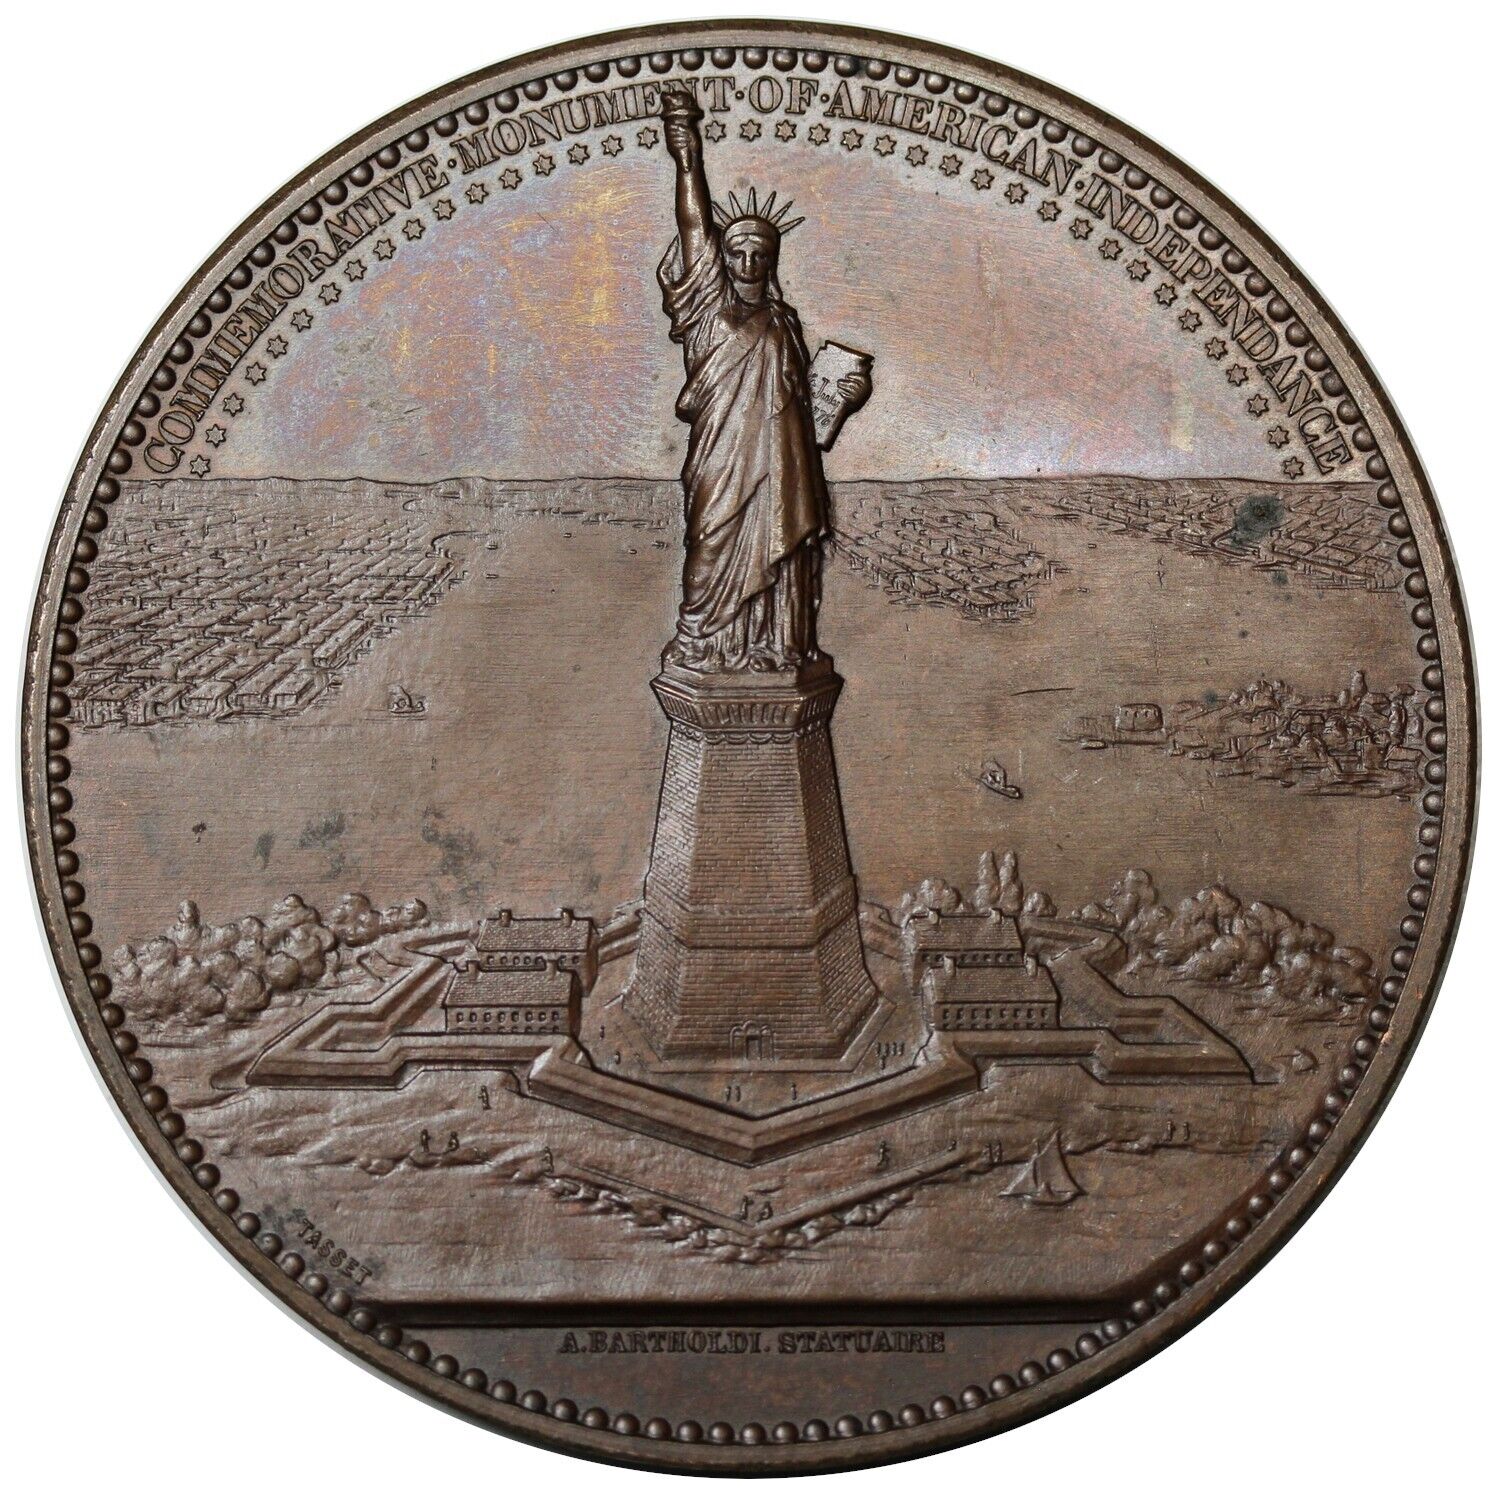 1886 Statue of Liberty Medal by Tasset, struck in bronze from Bartholdi\'s studio